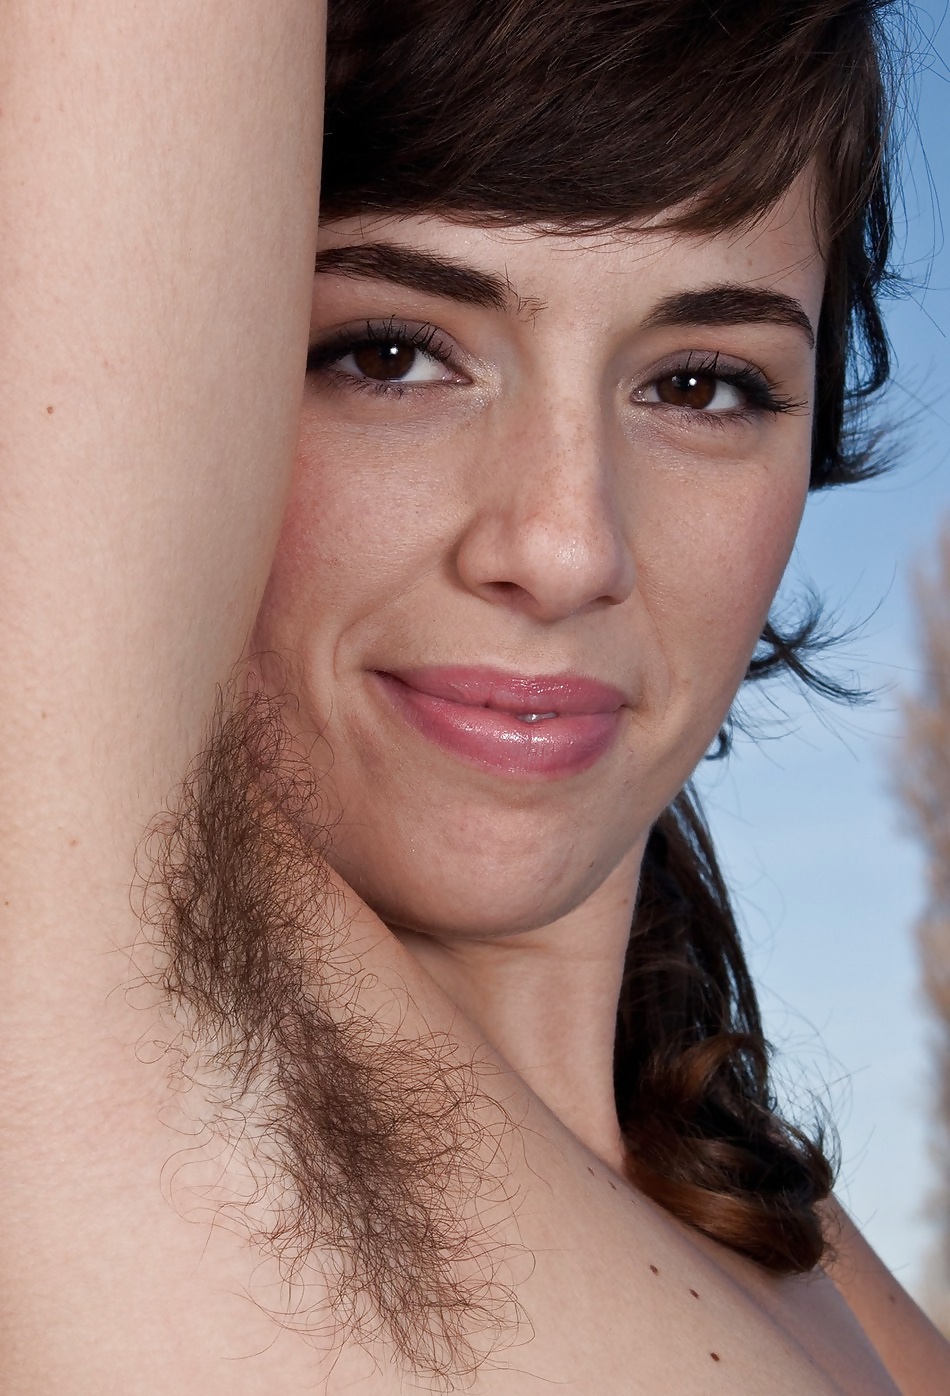 Miscellaneous girls showing hairy, unshaven armpits 2 #36246641